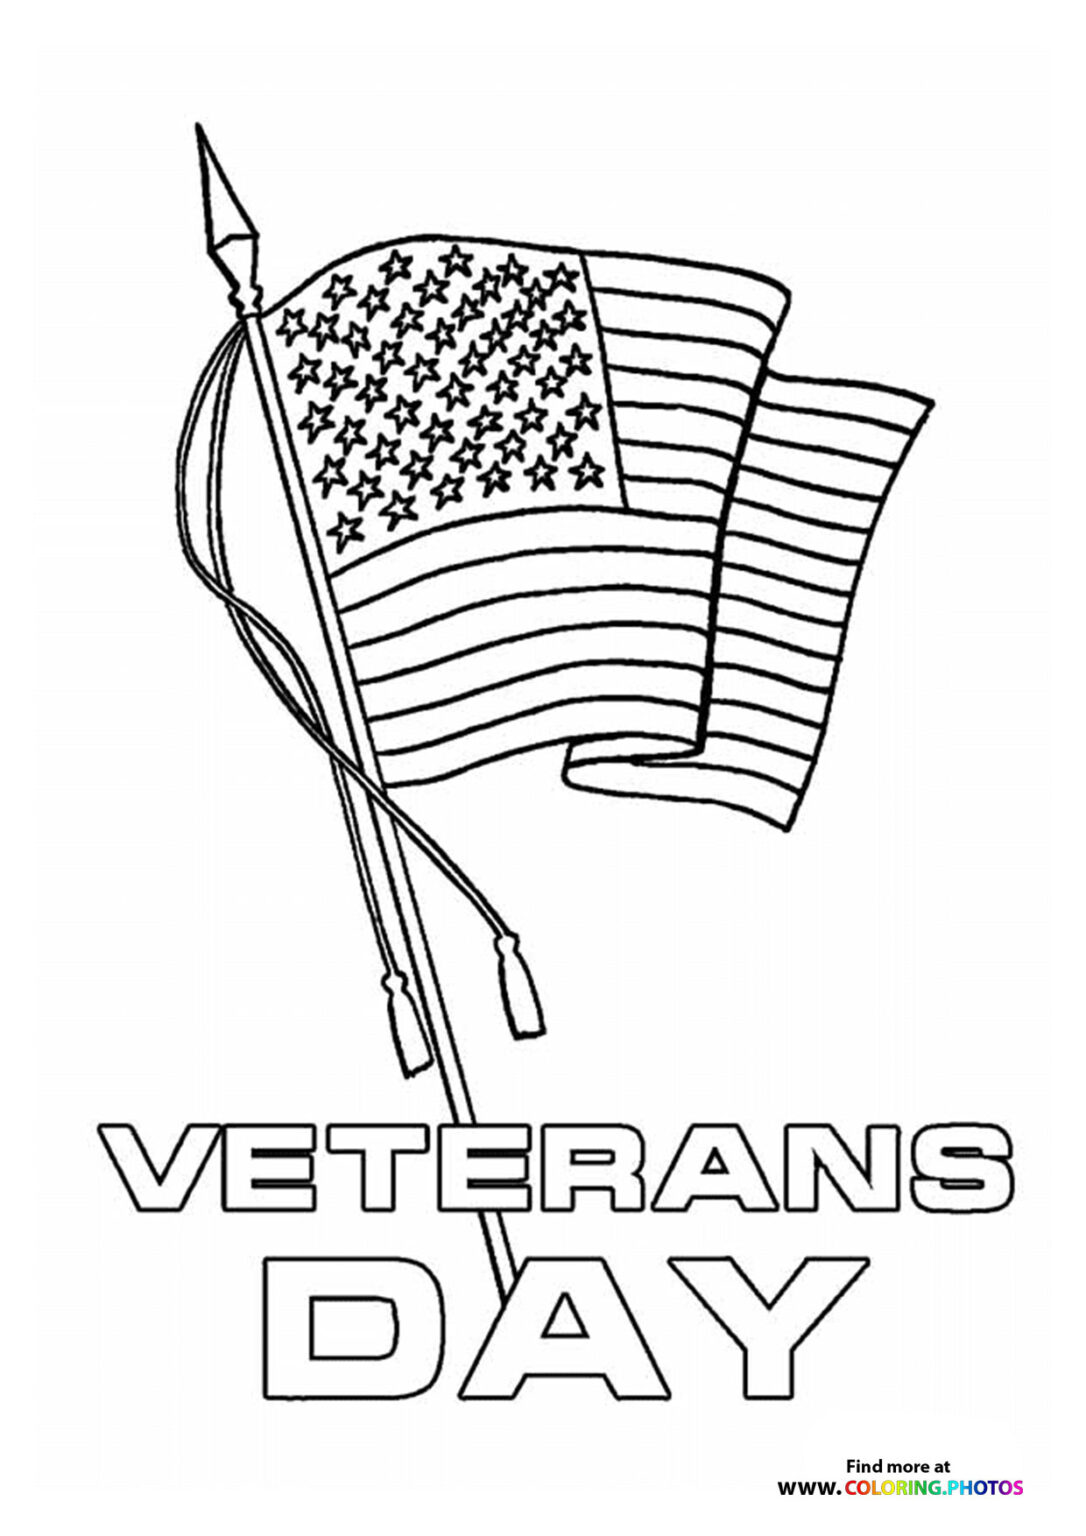 Veterans Day Coloring Pages For Kids Free And Easy Print Or Download